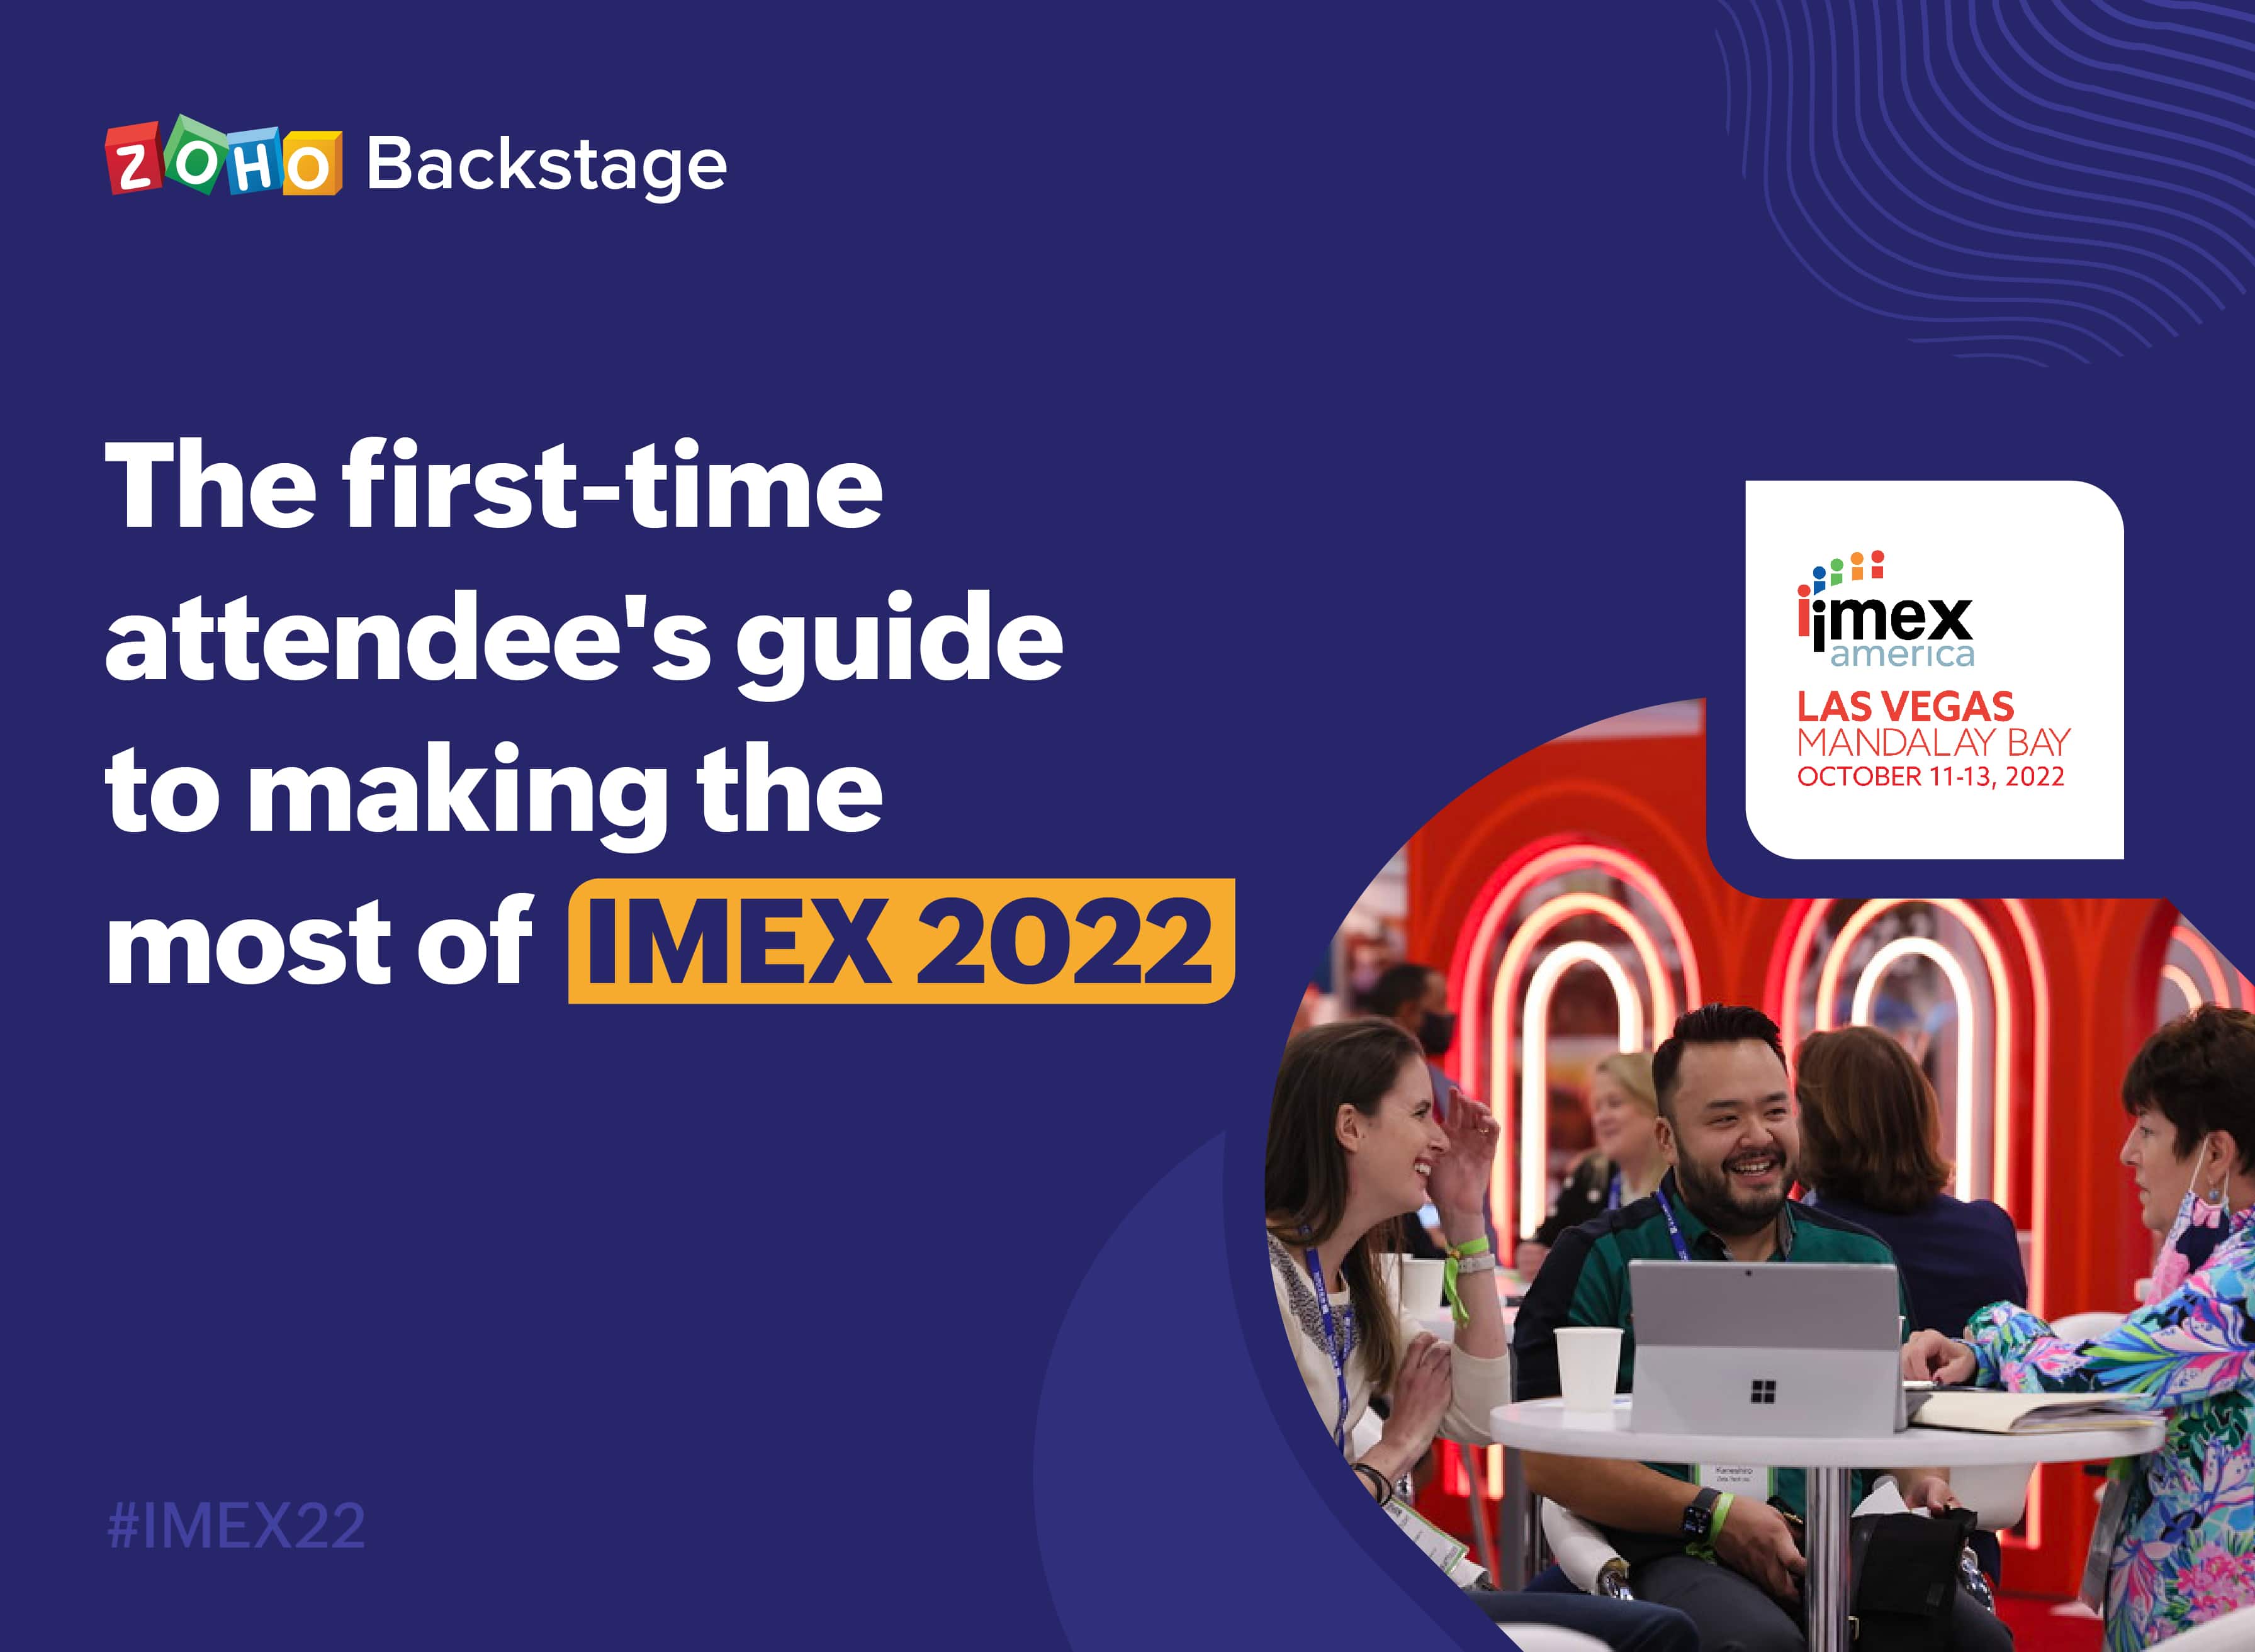 A first-time attendee's guide to IMEX 2022